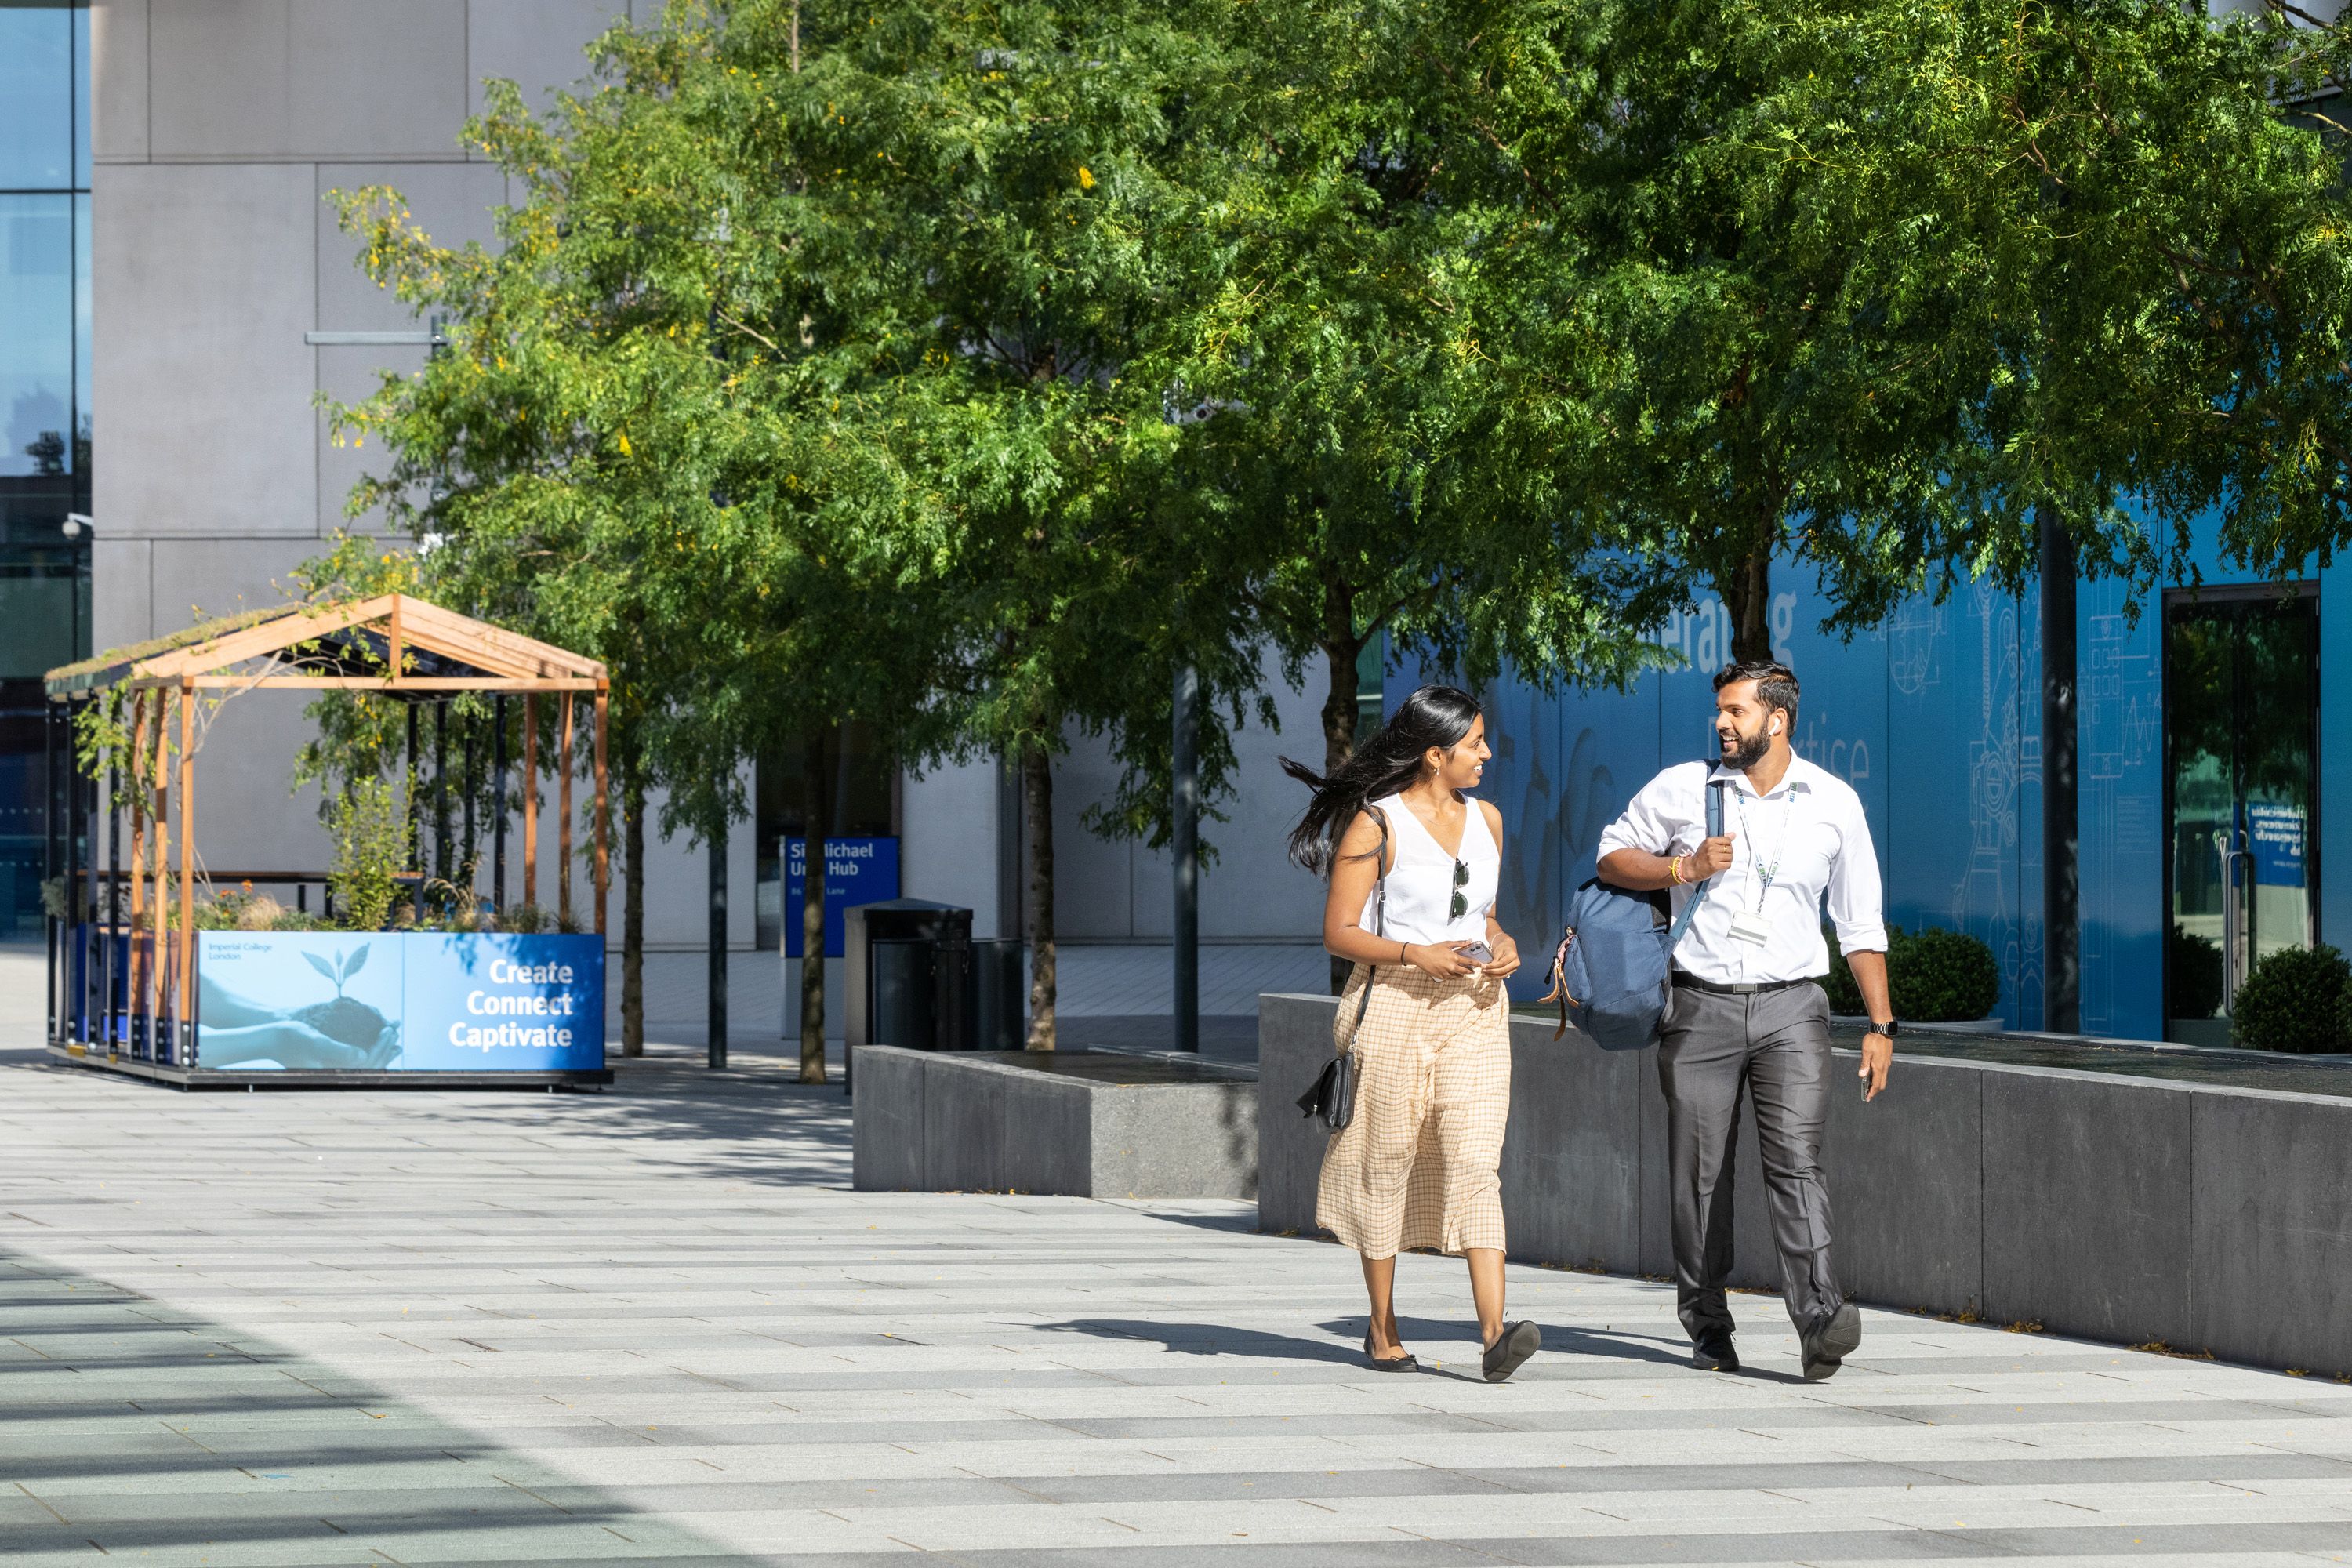 A man and woman smiling and talking walk along a sunny pedestrian area outside the Sir Michael Uren Hub building